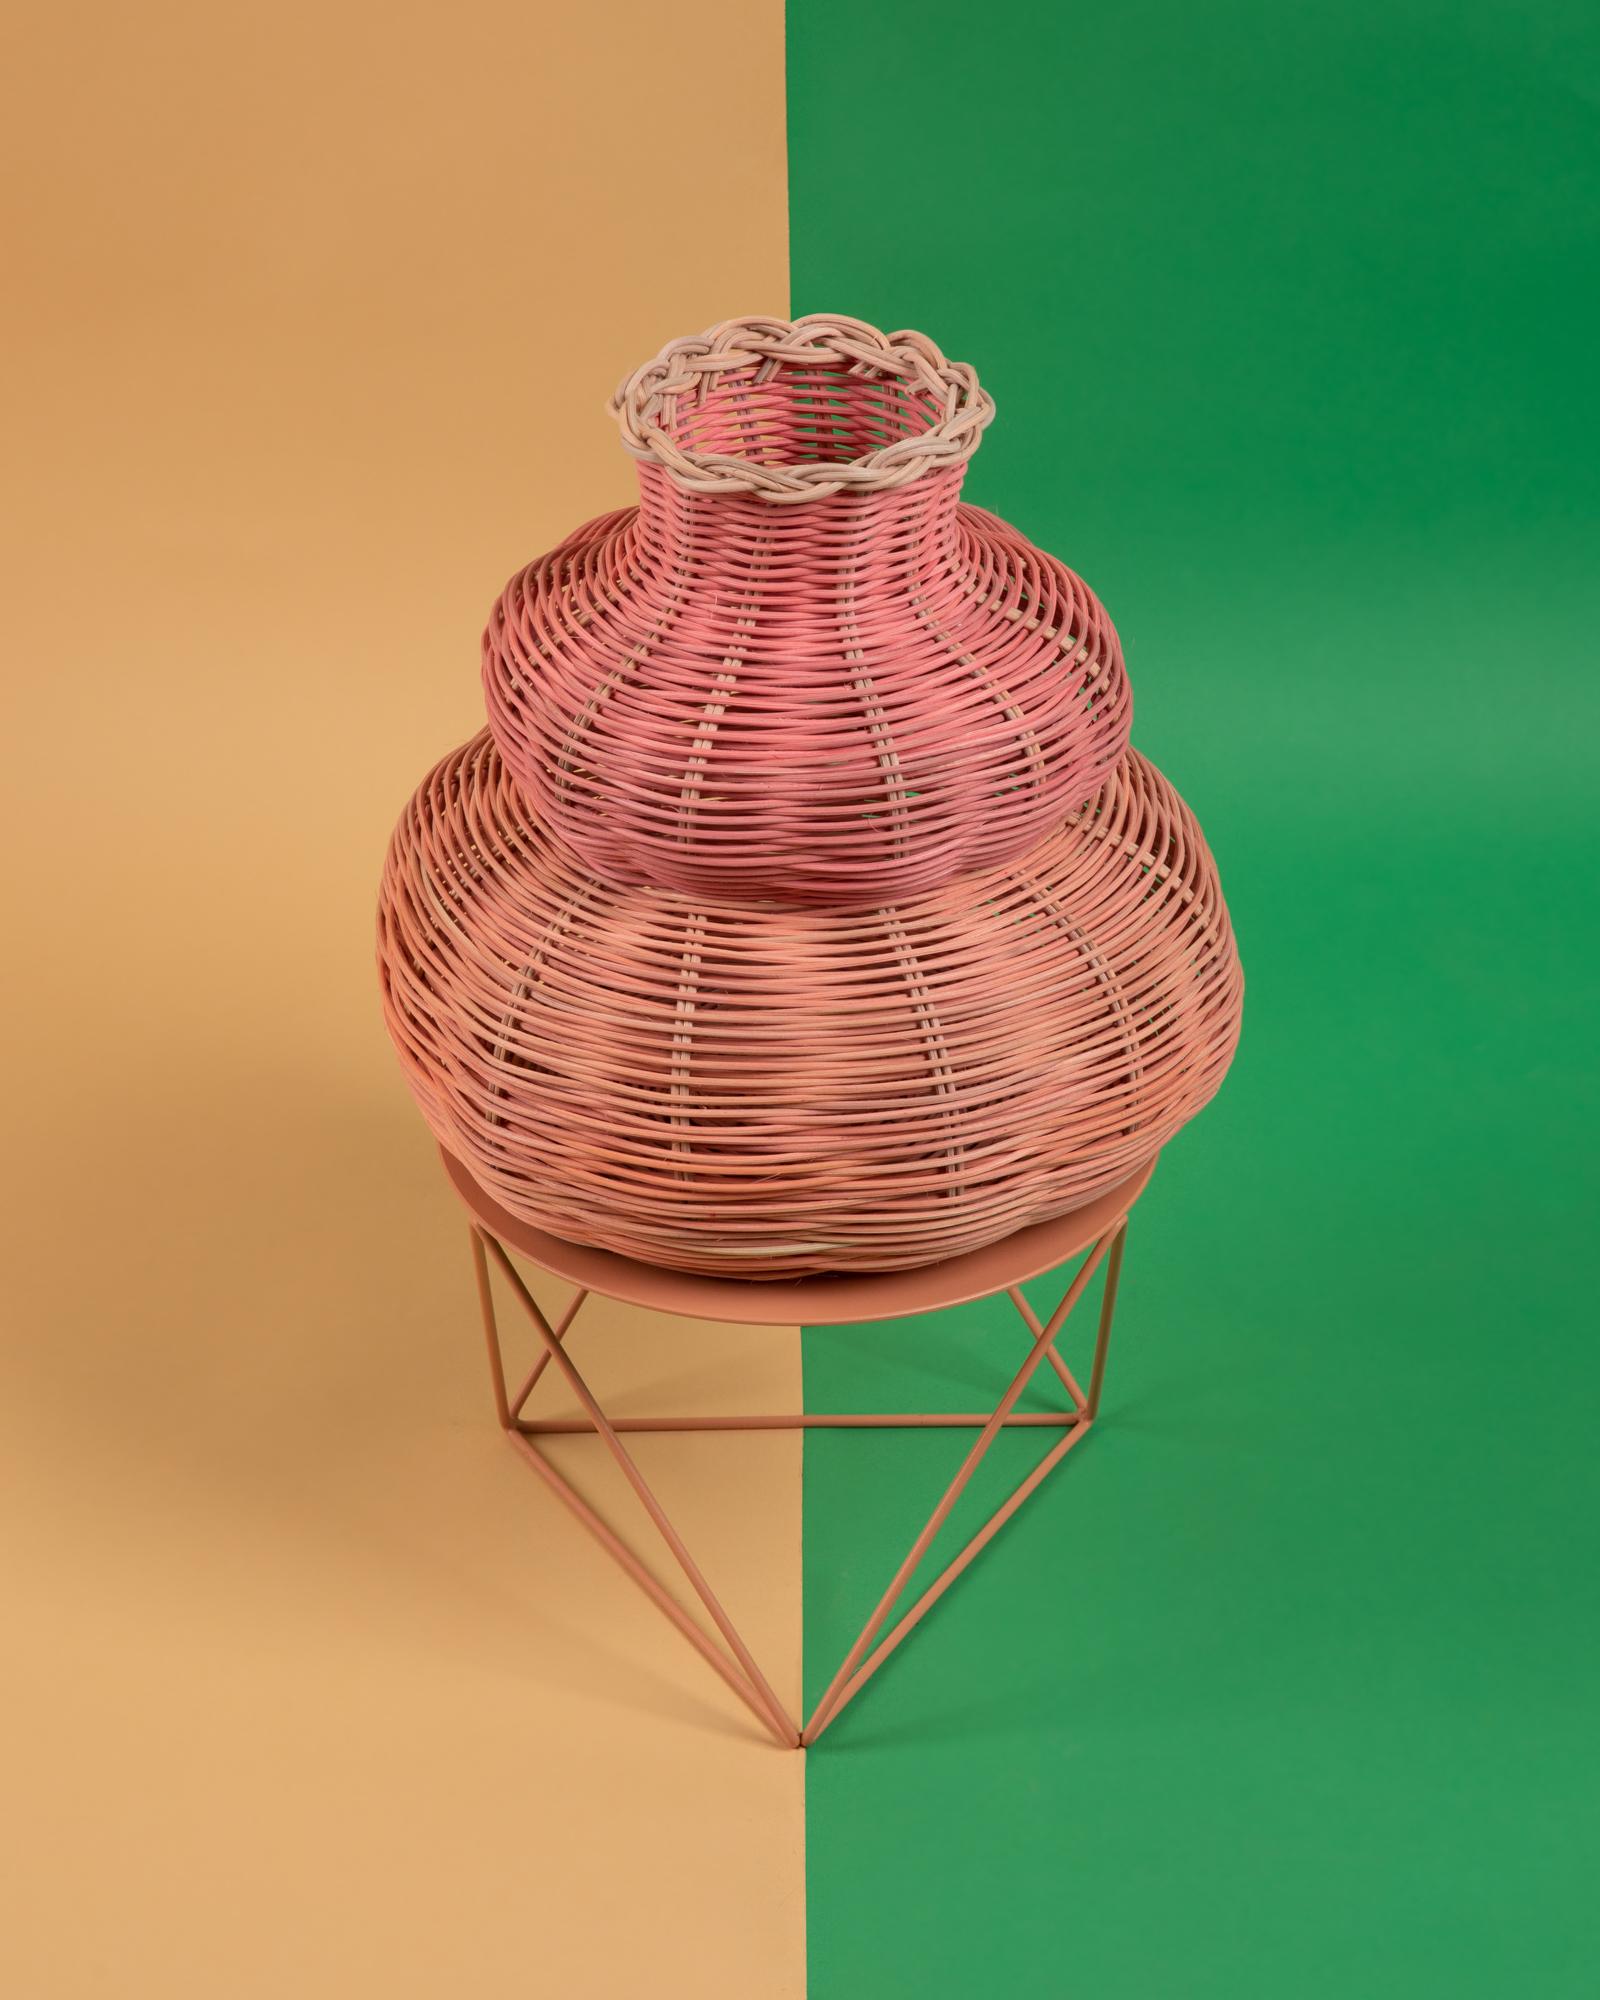 The Hillary Vase is hand dyed and woven with reed in our Chicago studio. Inspired by forms in ancient Greek ceramics, the material language of this vessel brings together the rich craft history of weaving with 3 dimensional form.

All of Studio